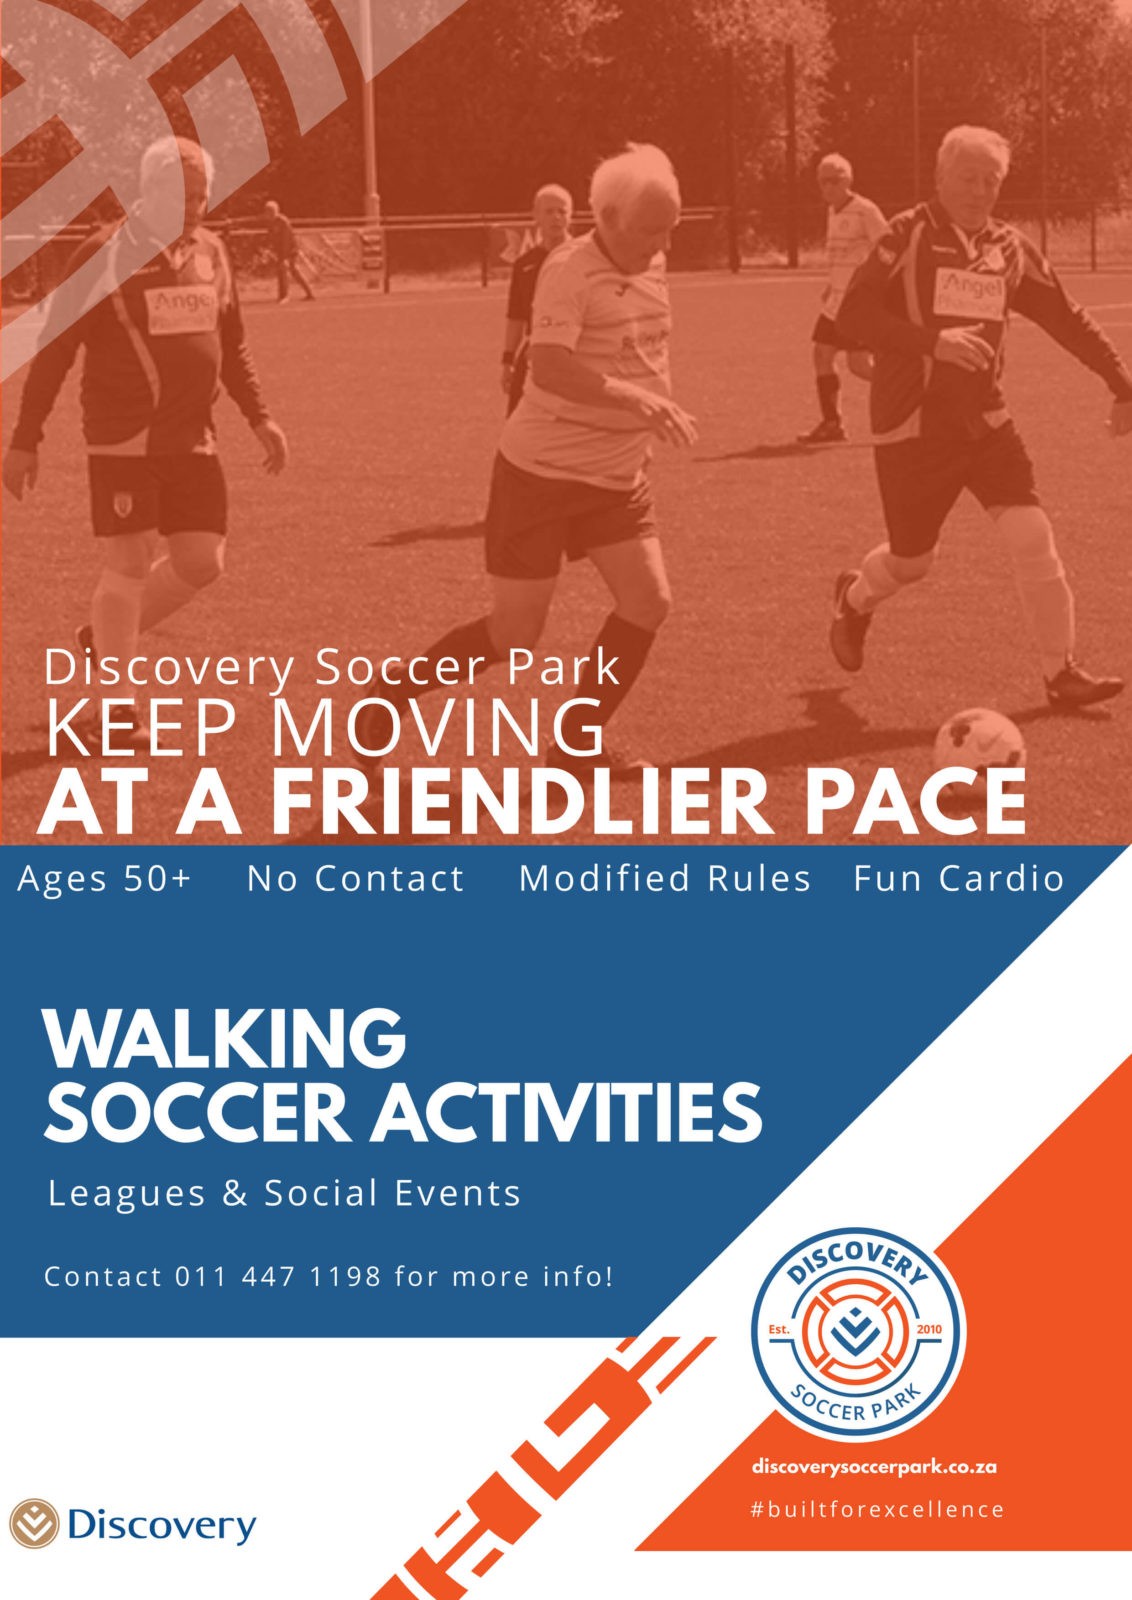 wanderers club Discovery Soccer Park News, April 2019 5